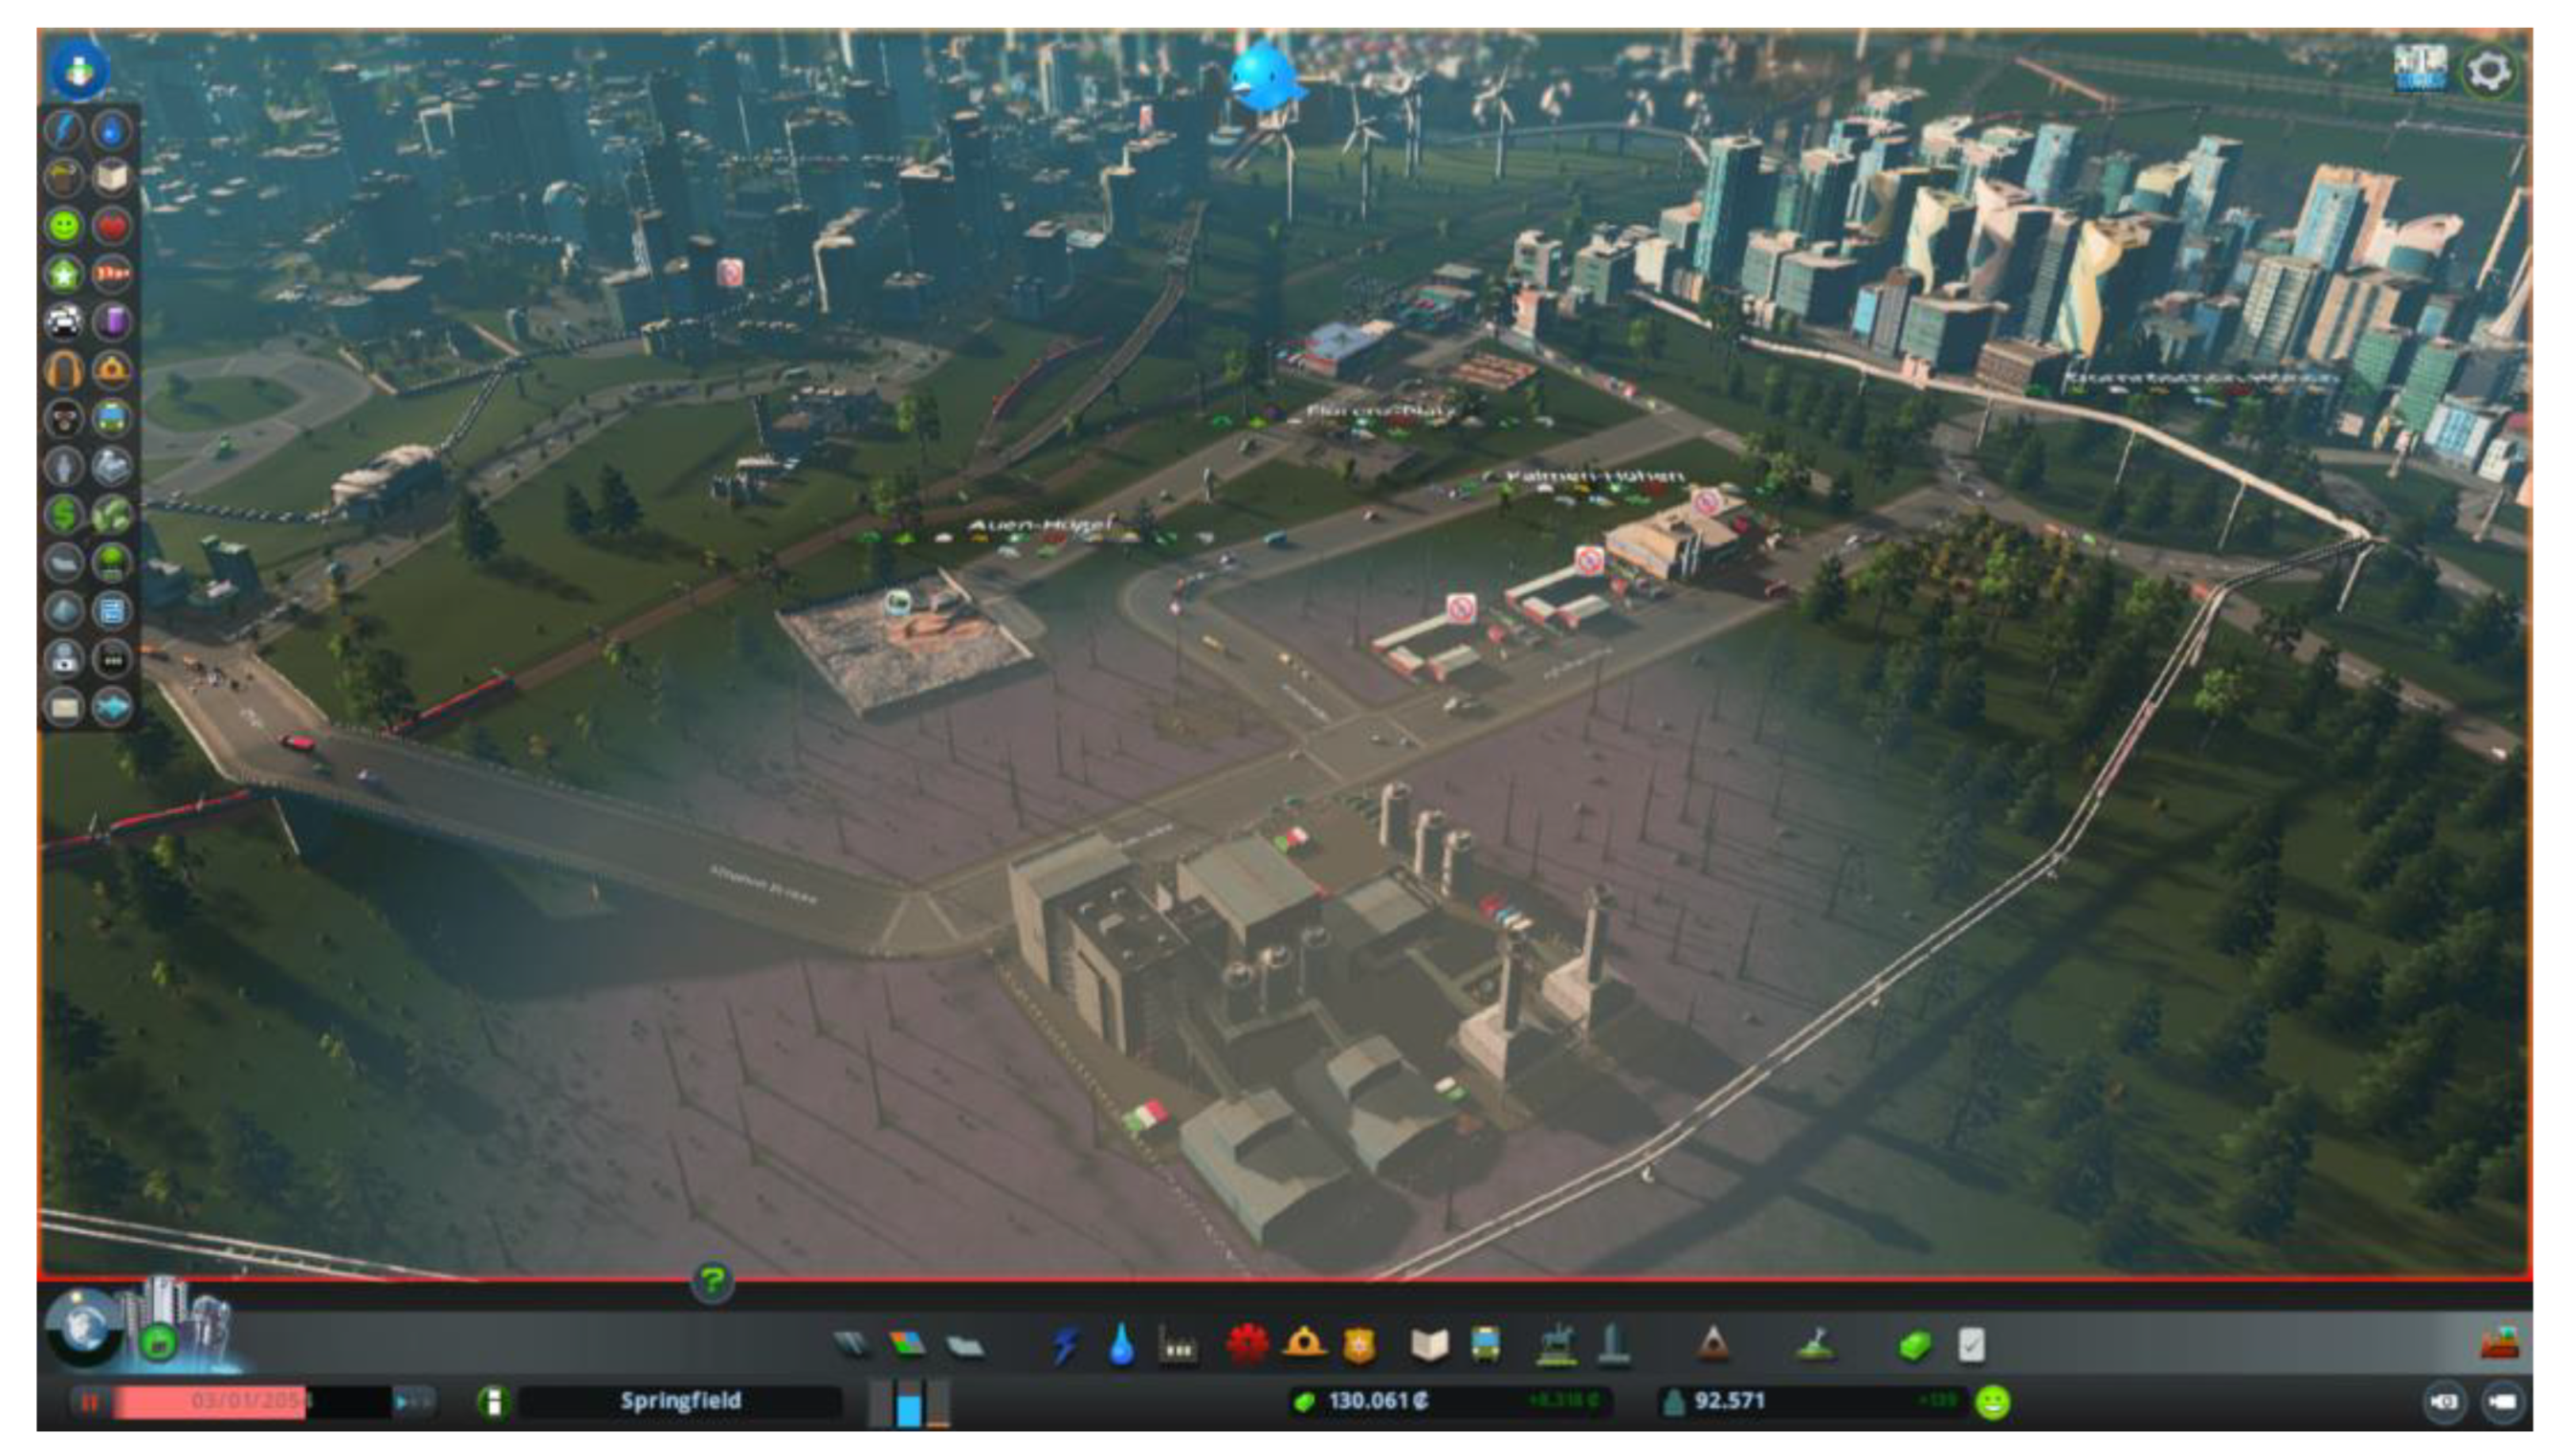 Cities: Skylines - Paradox Interactive Makes A SimCity, Page 11